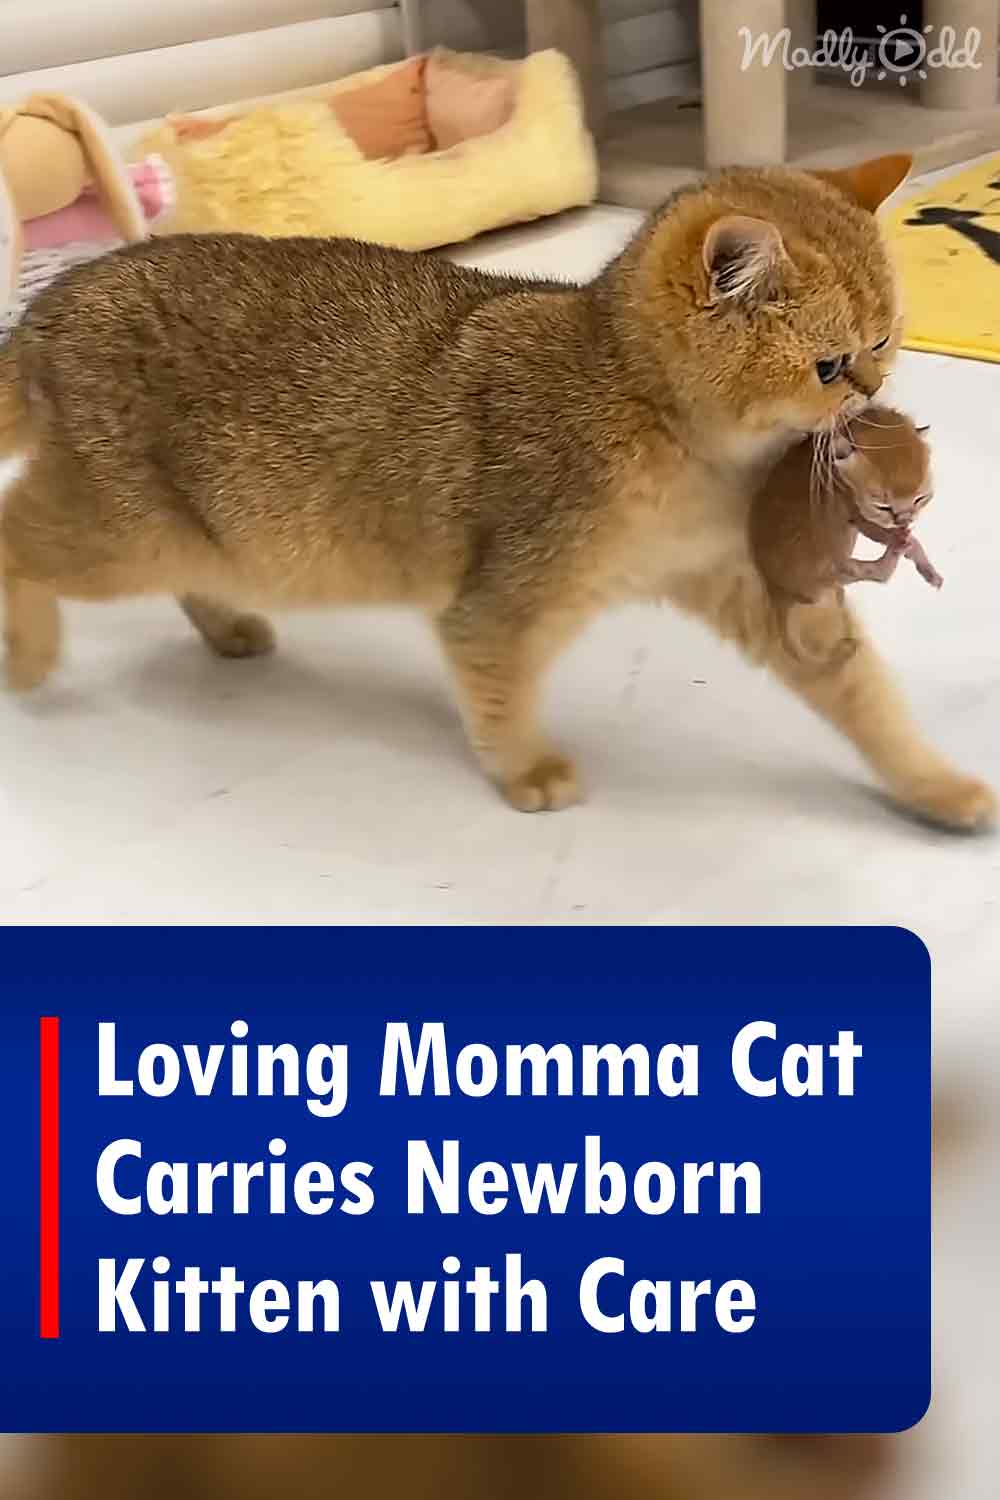 Loving Momma Cat Carries Newborn Kitten with Care